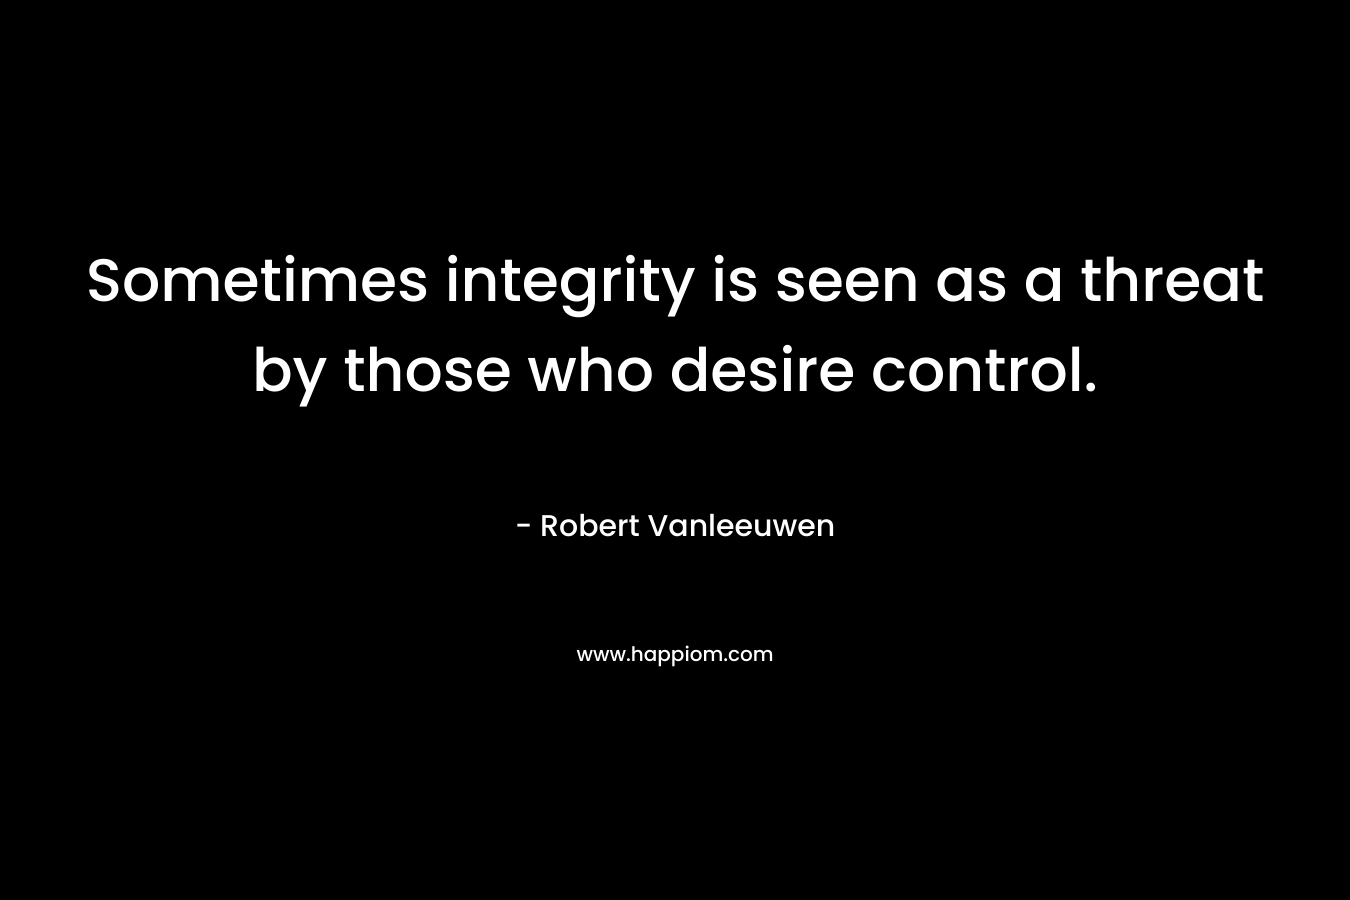 Sometimes integrity is seen as a threat by those who desire control.